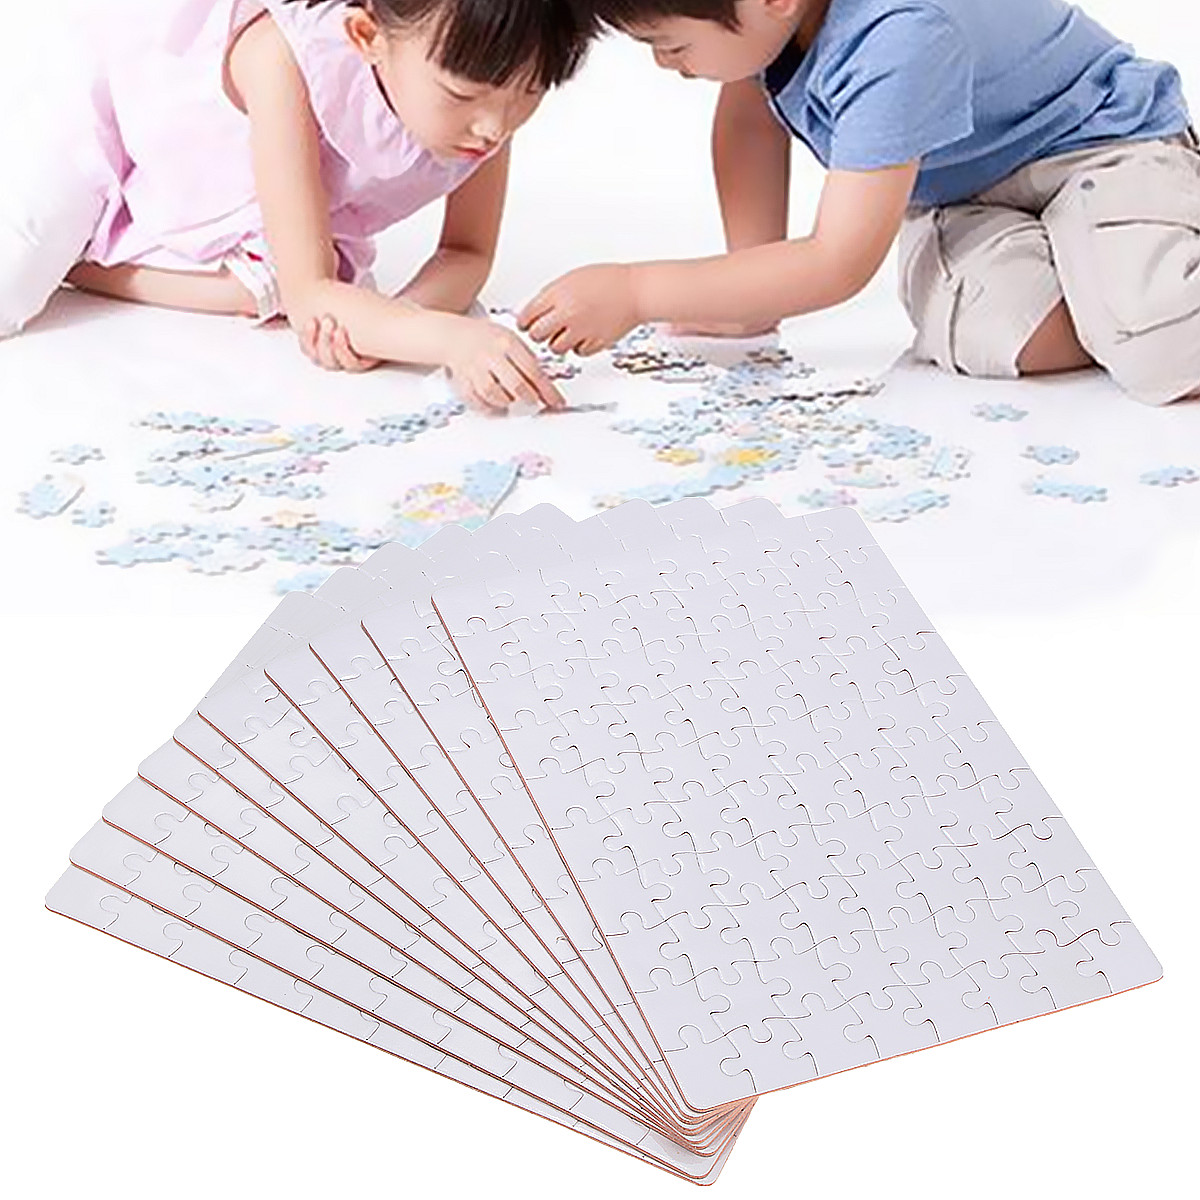 Blank Jigsaw Puzzle for sublimation printing - 120 Pieces A4 size